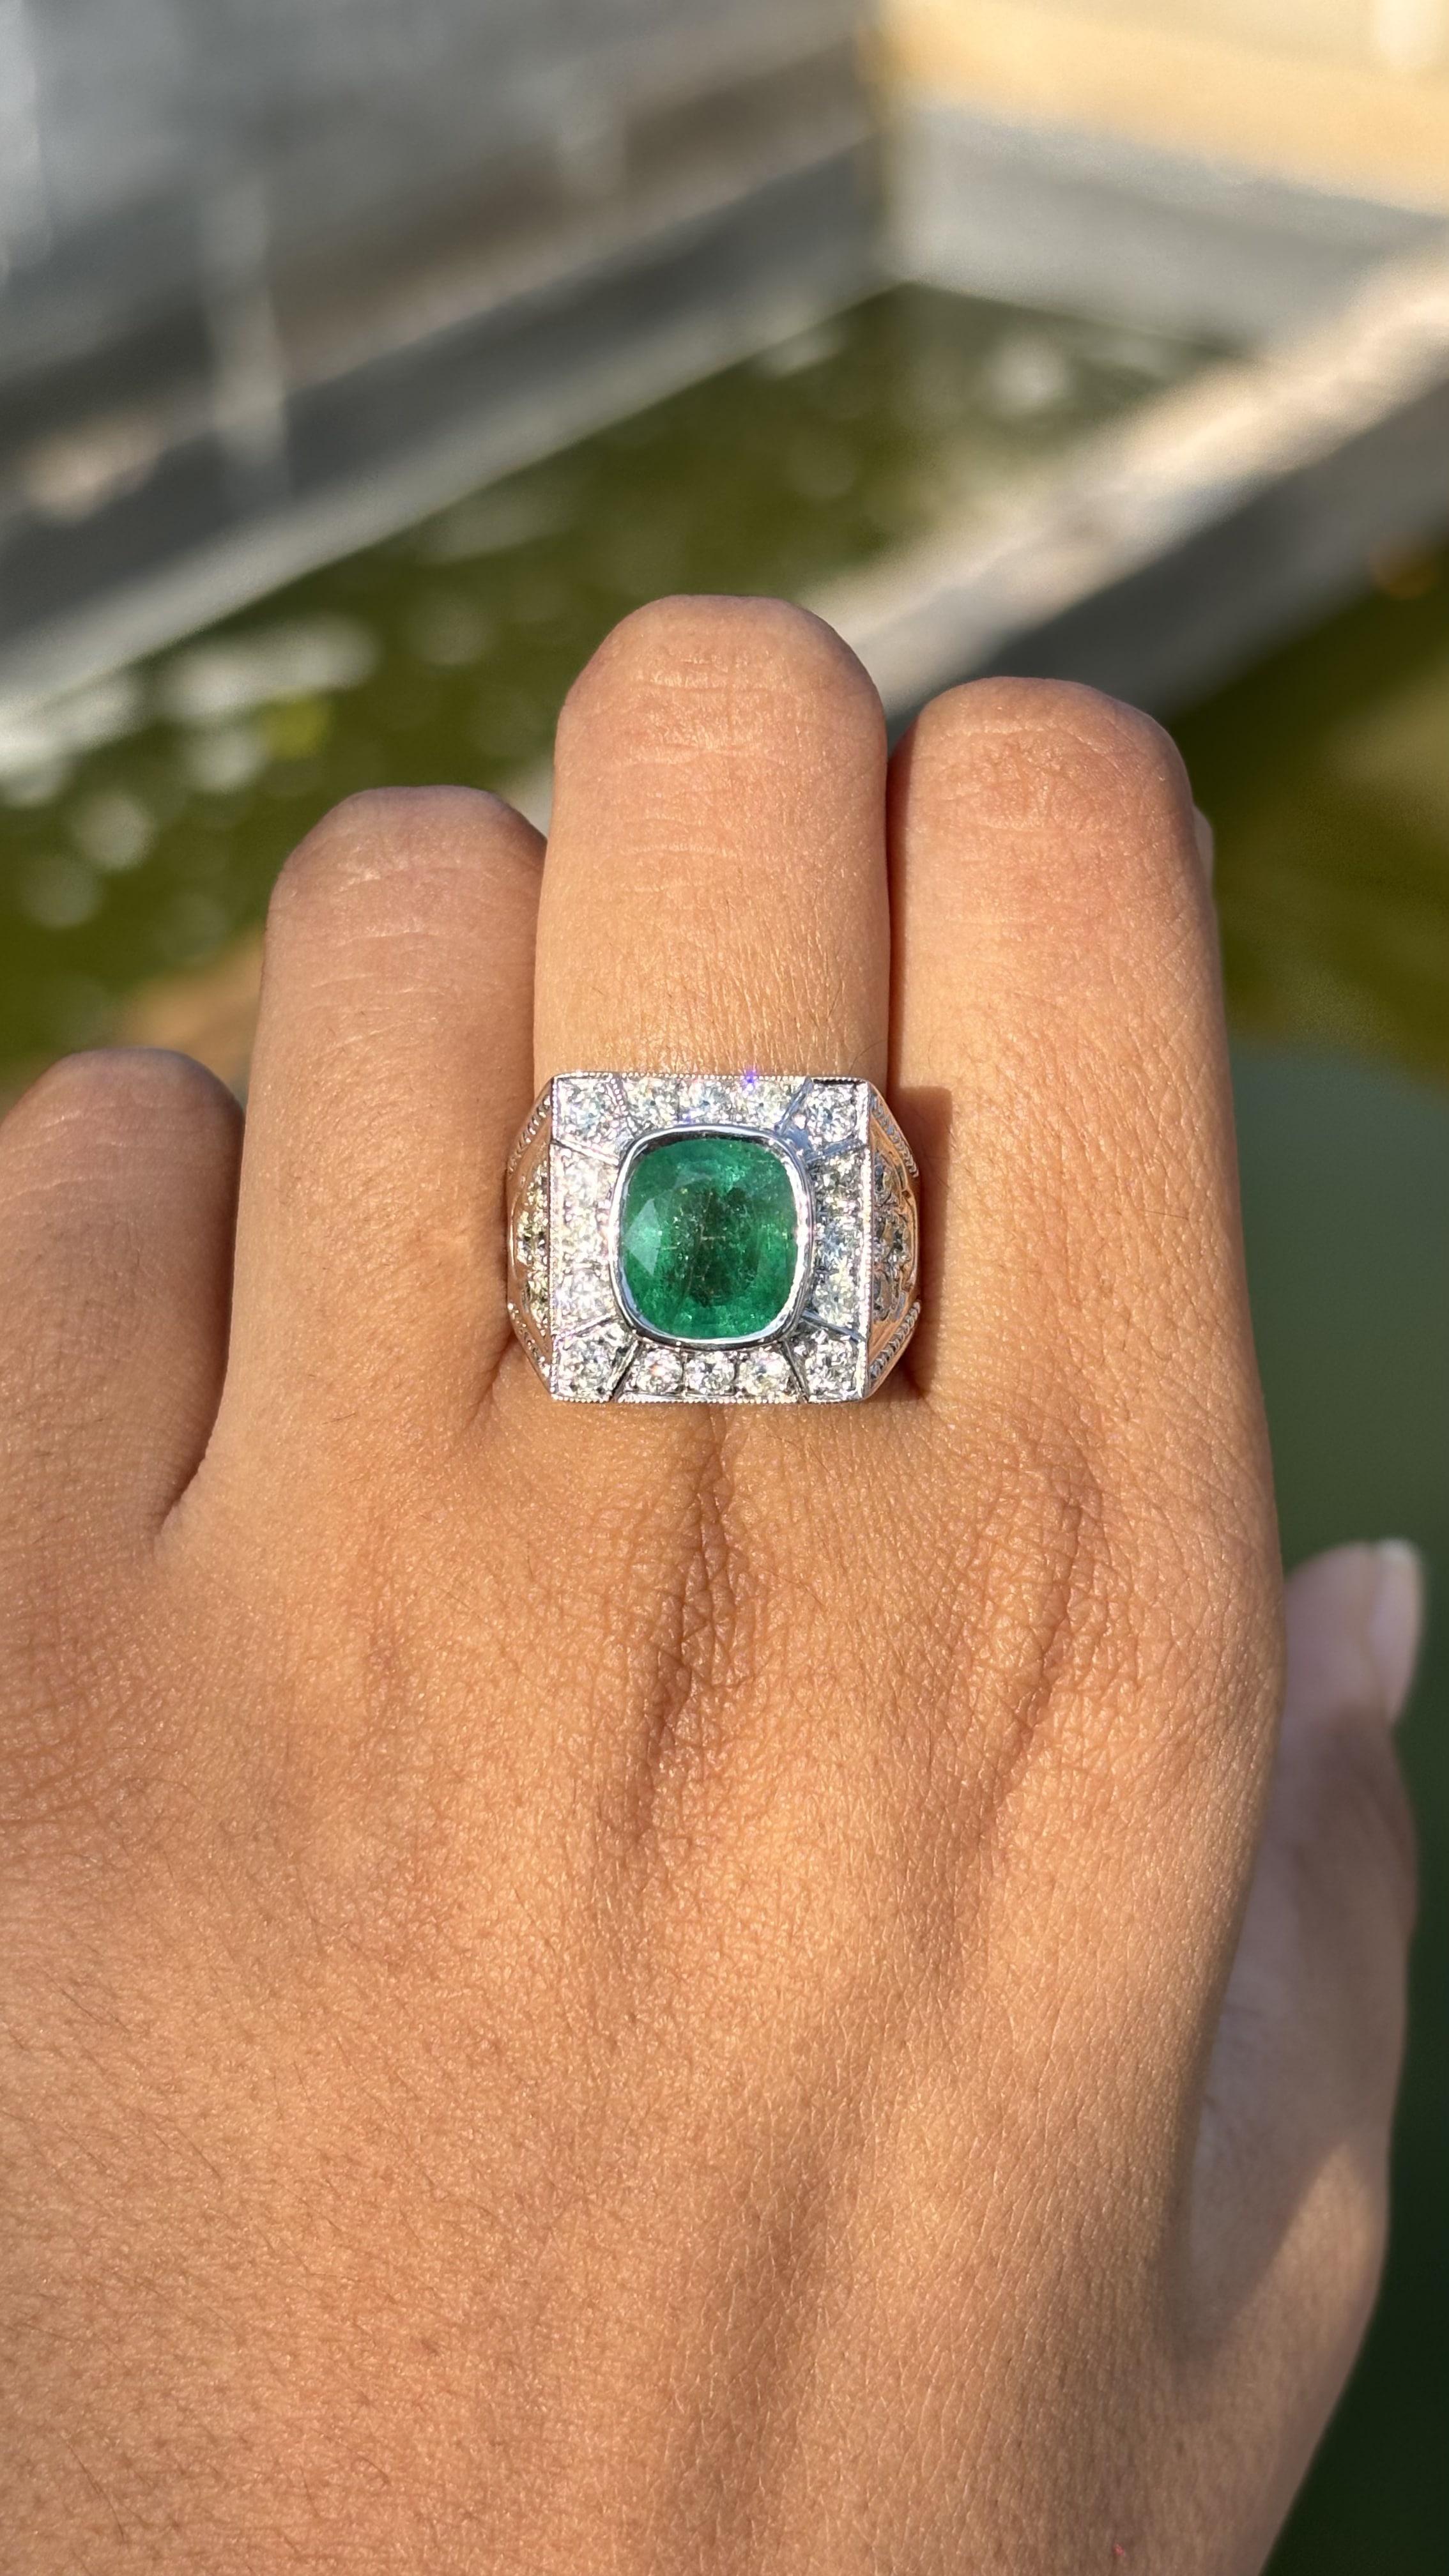 2.66 ct Zambian Emerald Art Deco Ring with Old Cut Diamonds in 18K Gold 4